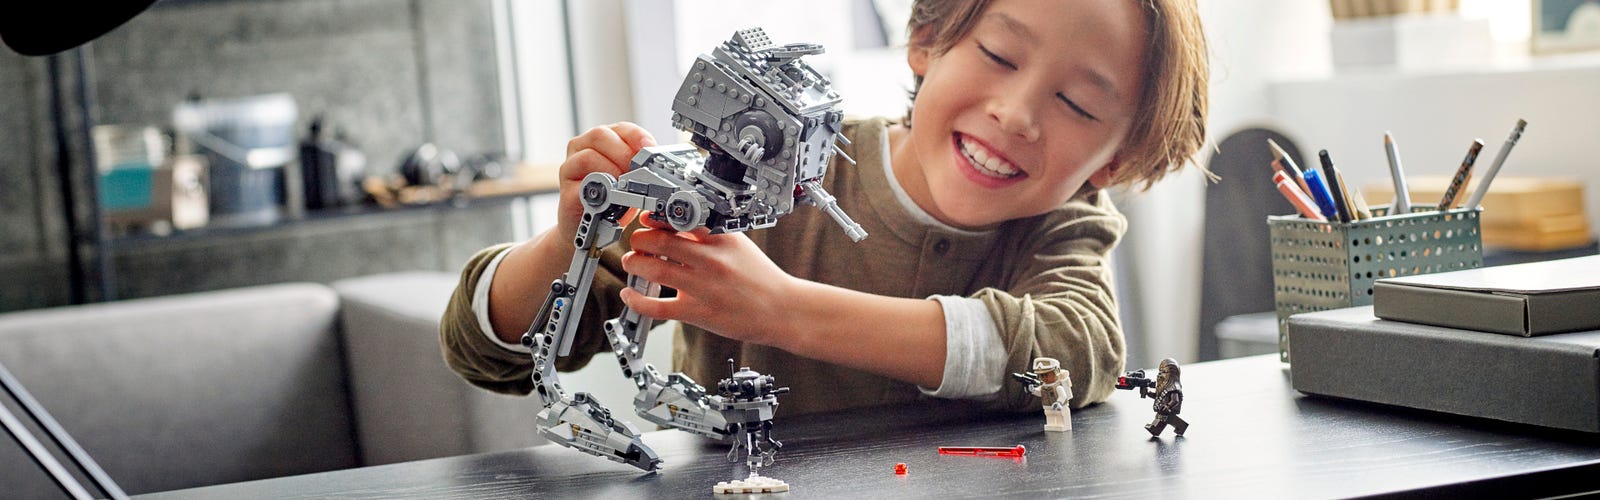 The top 10 Star Wars roleplaying games for kids and teens